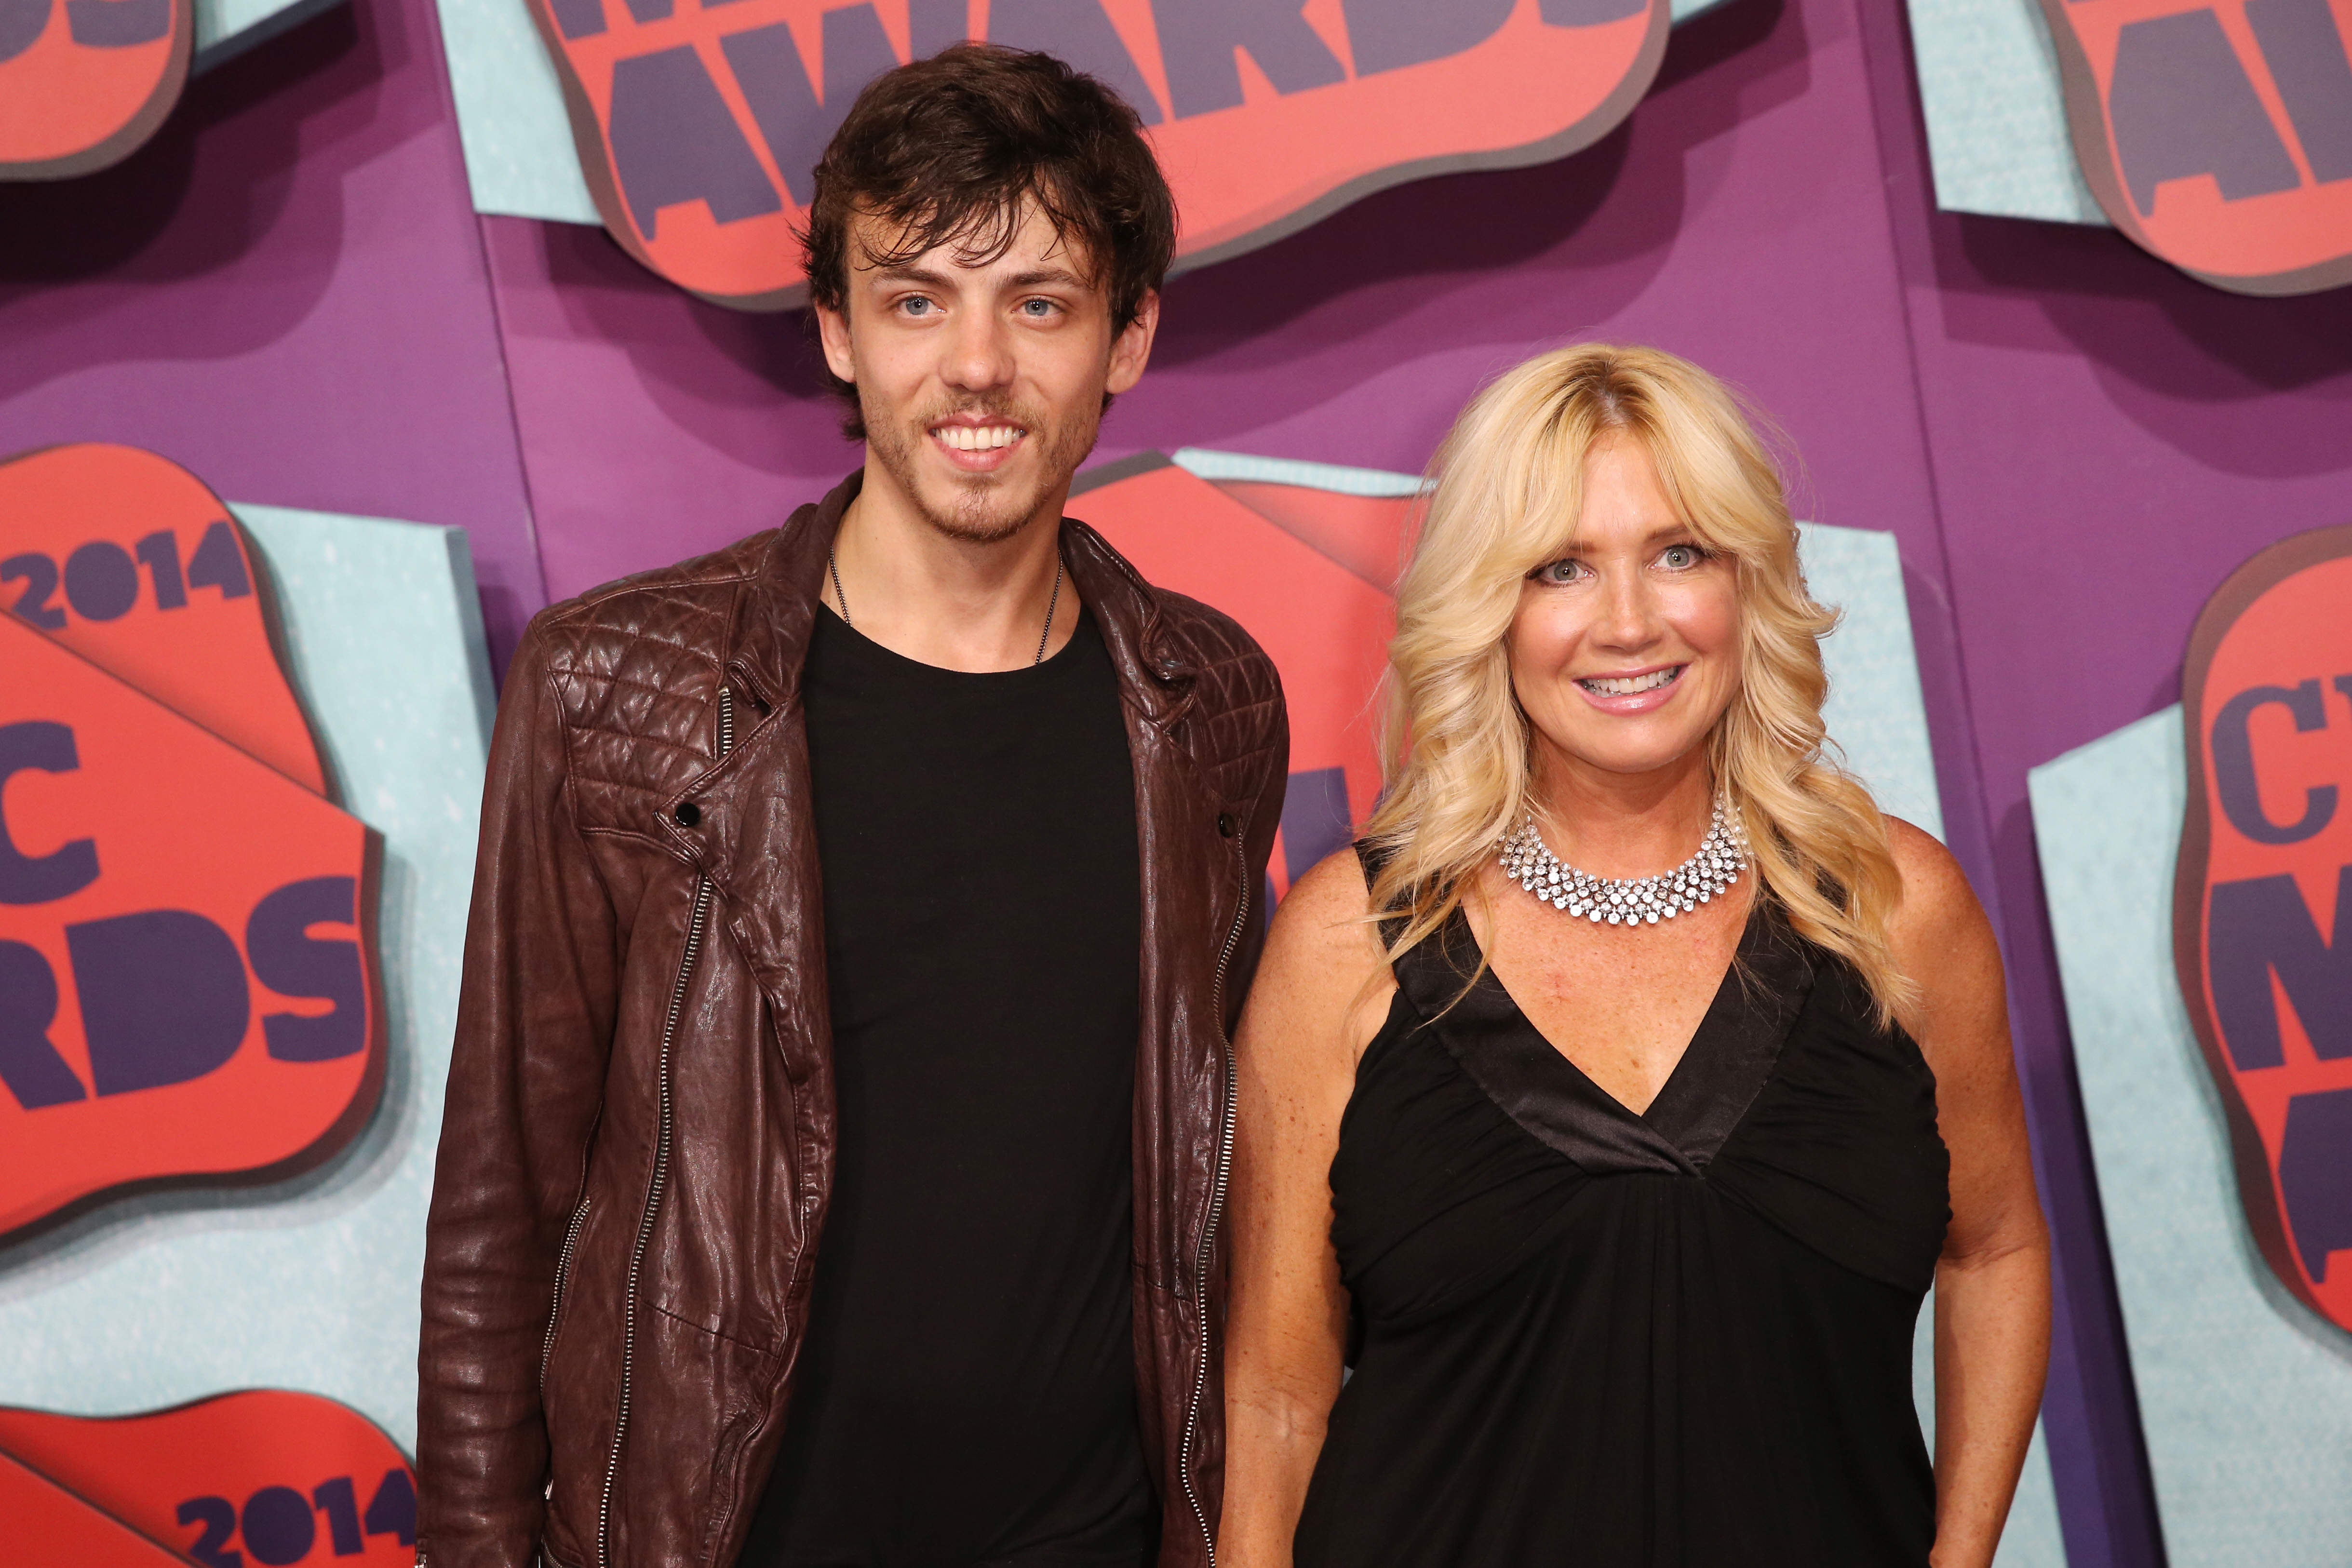 Chris Janson and wife Kelly Lynn Janson at the 2014 CMT Music Awards in Nashville, Tennessee. | Source: Getty Images